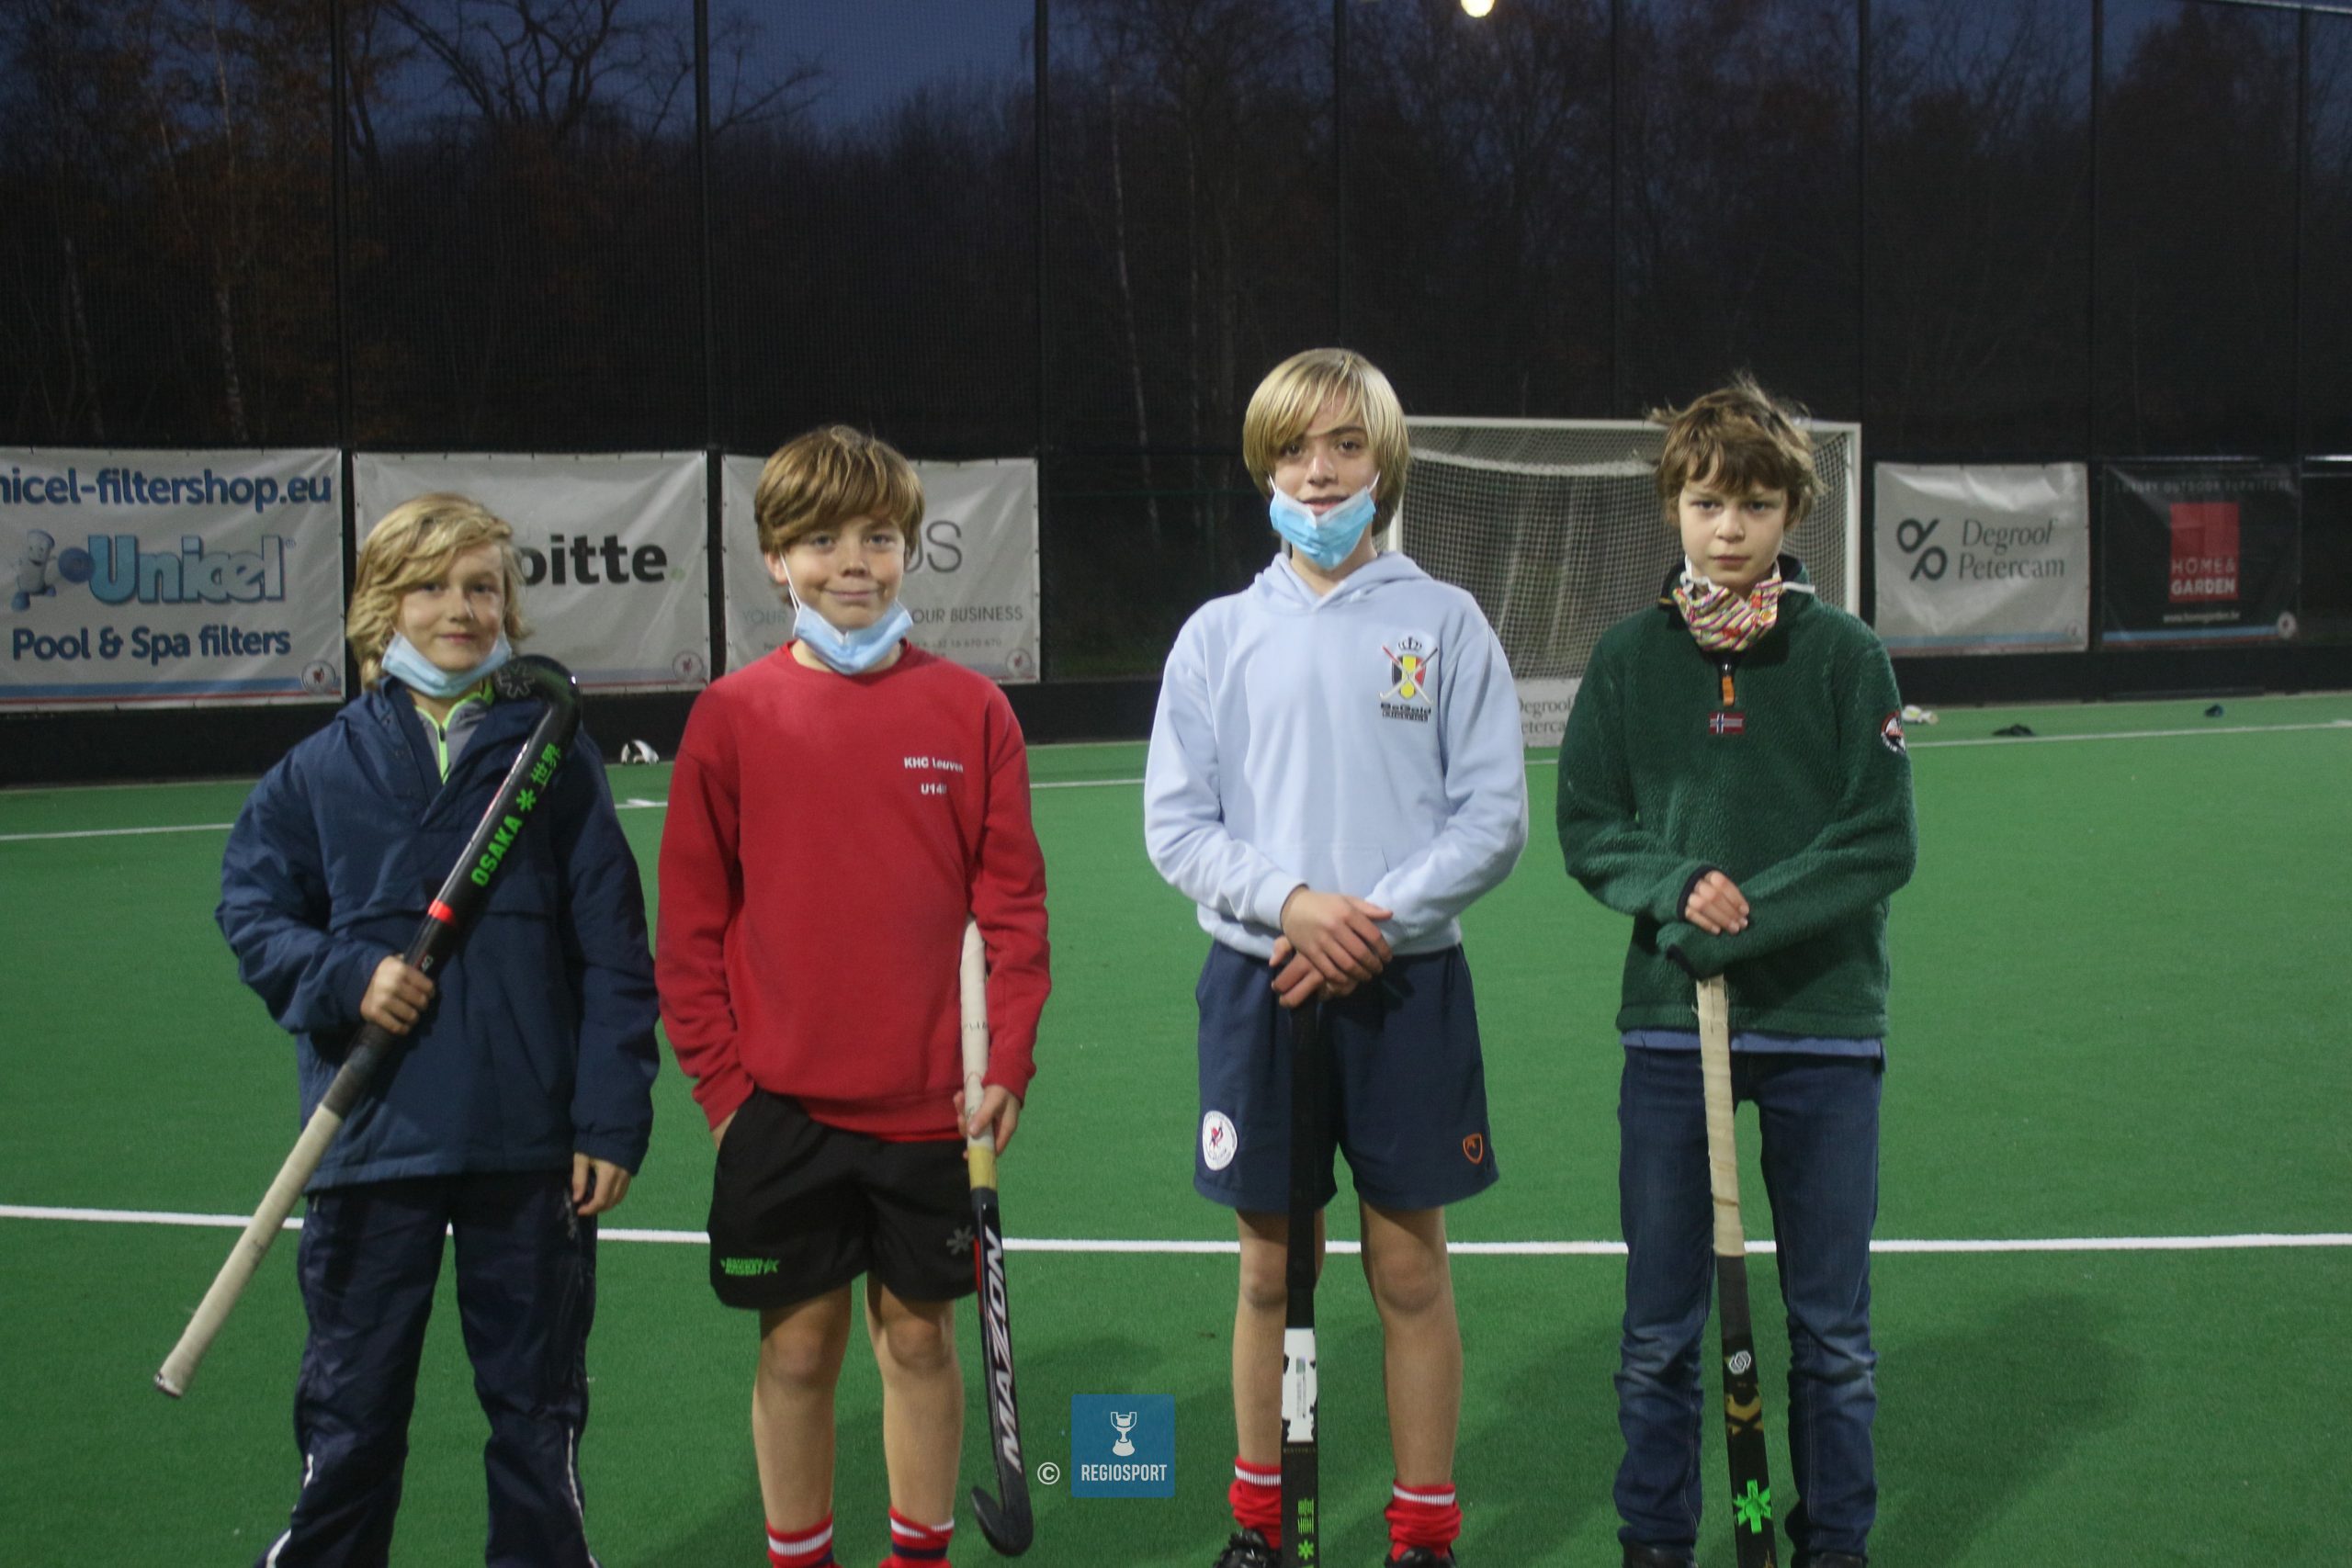 U14 boys KHC Leuven in the picture